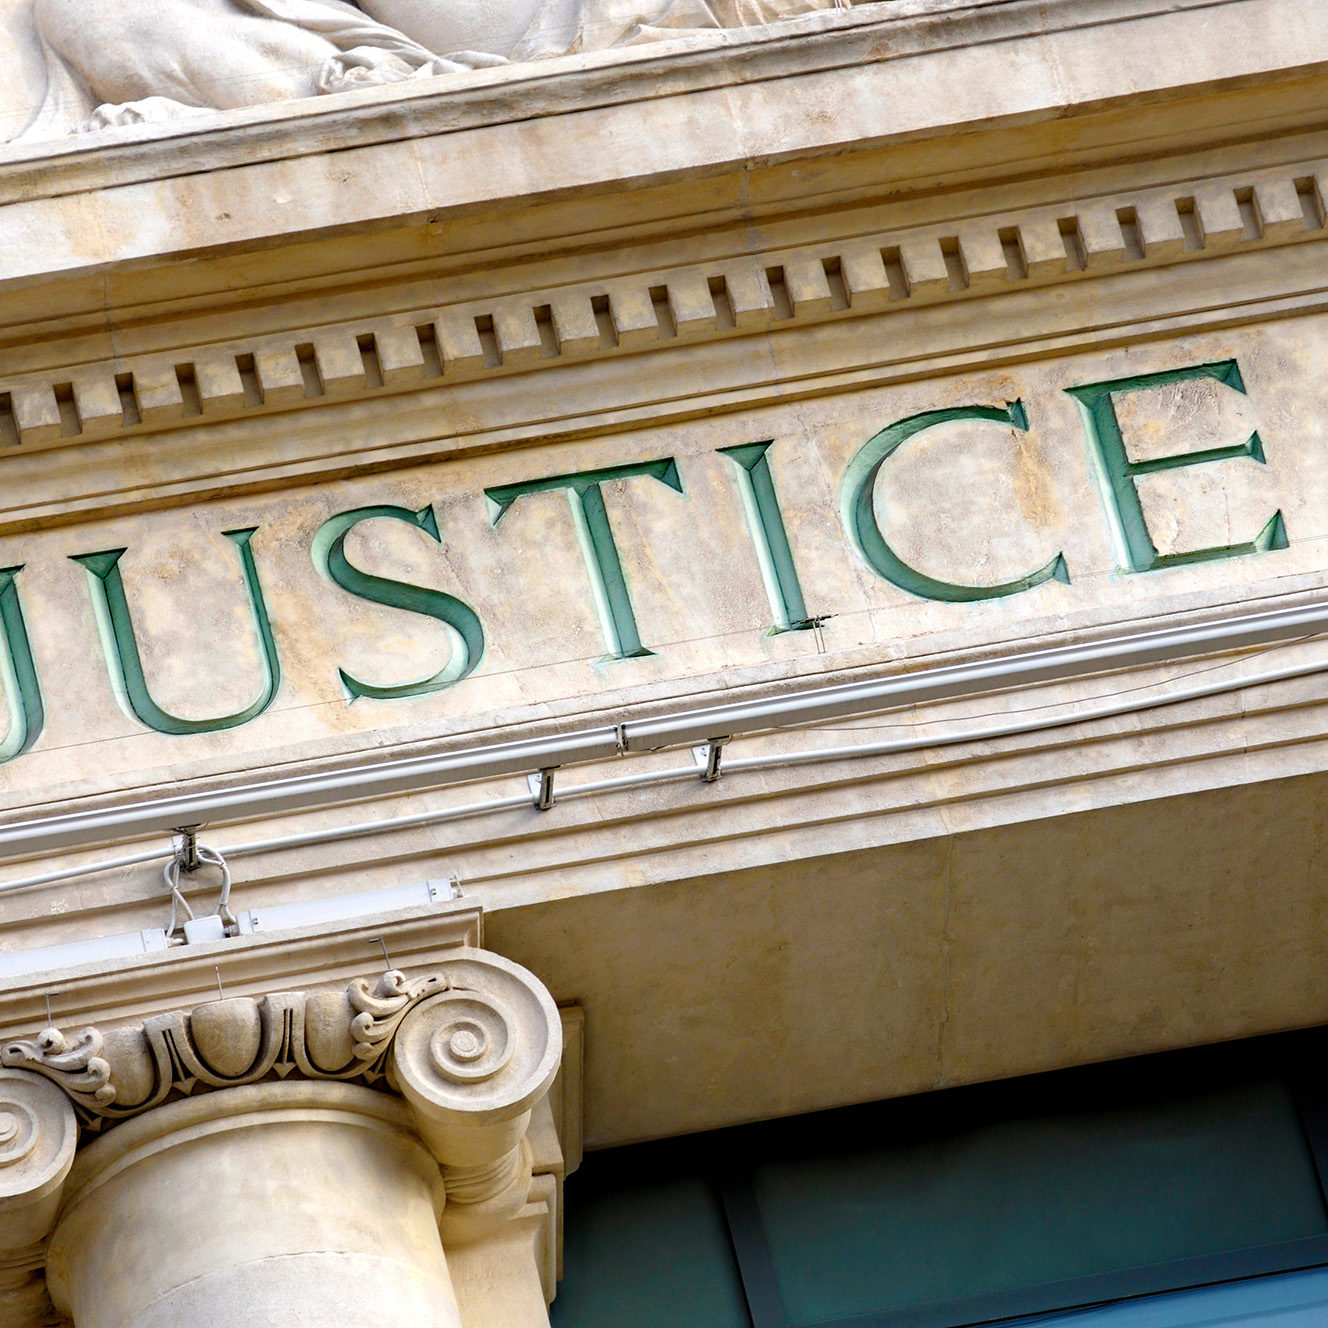 Justice sign on a Law Courts building